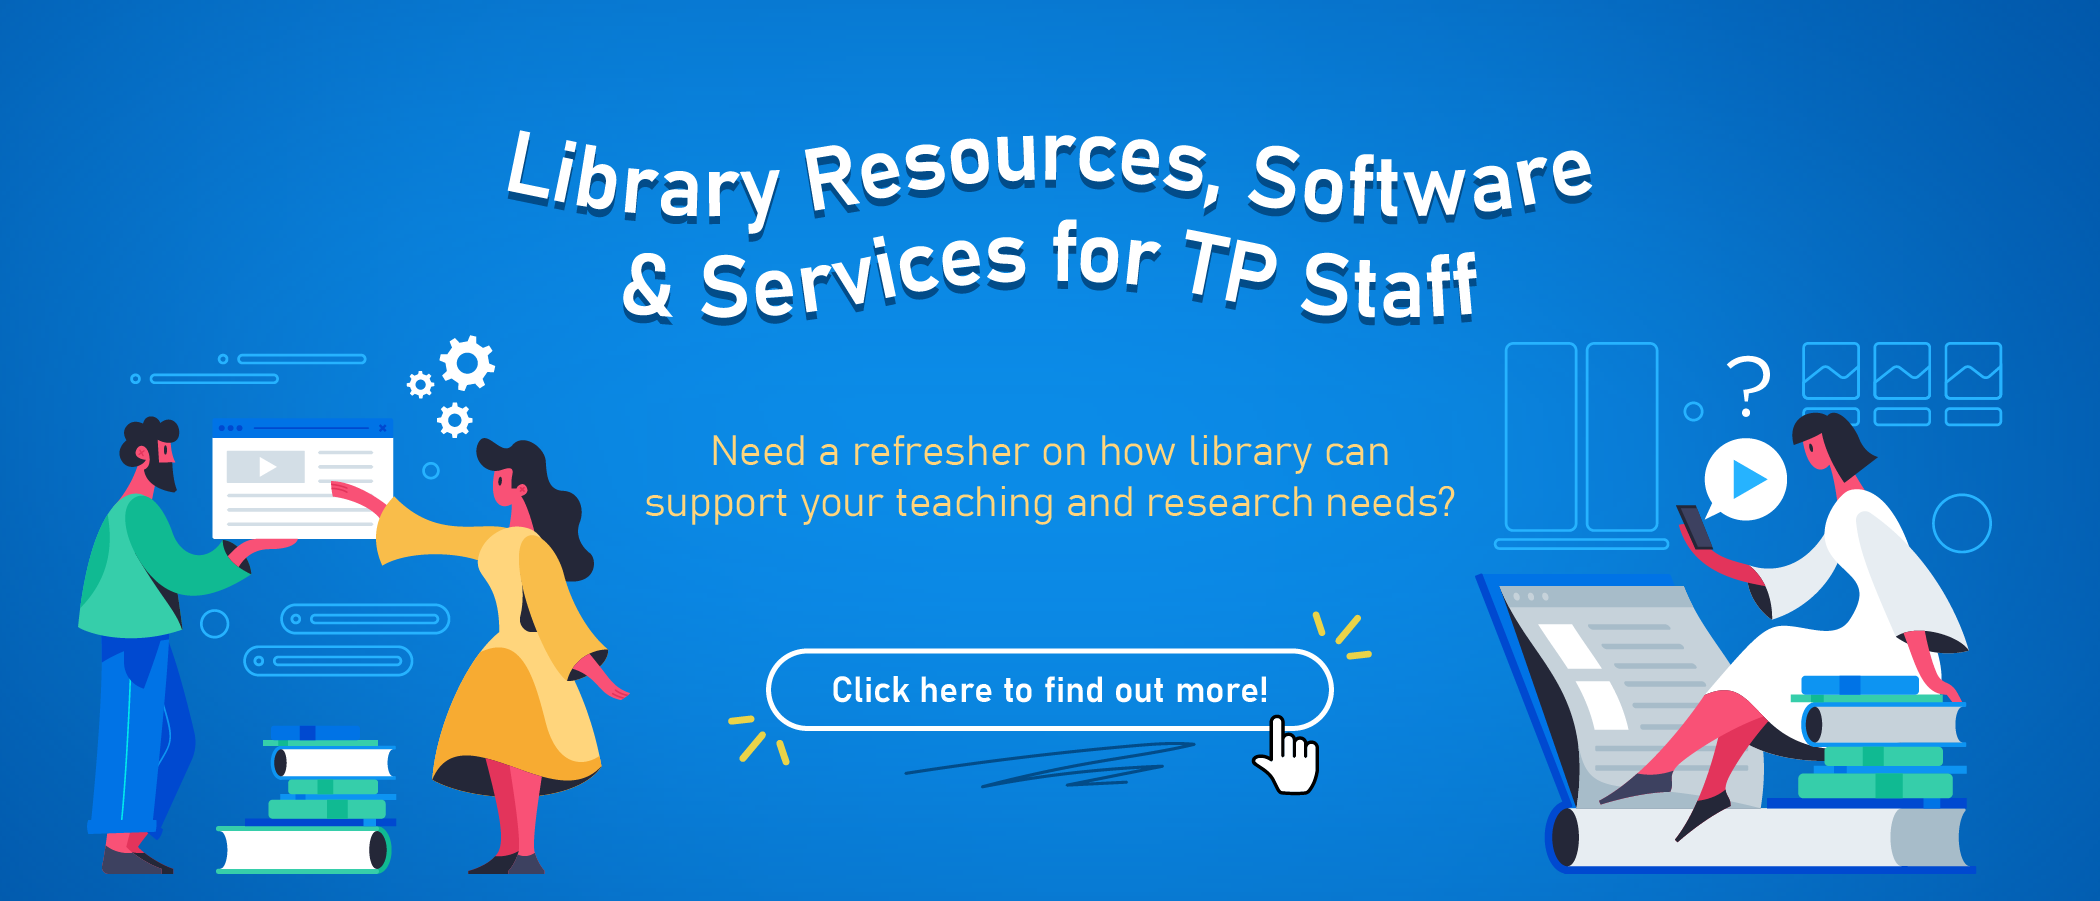 Library Resources, Software & Services for TP Staff 